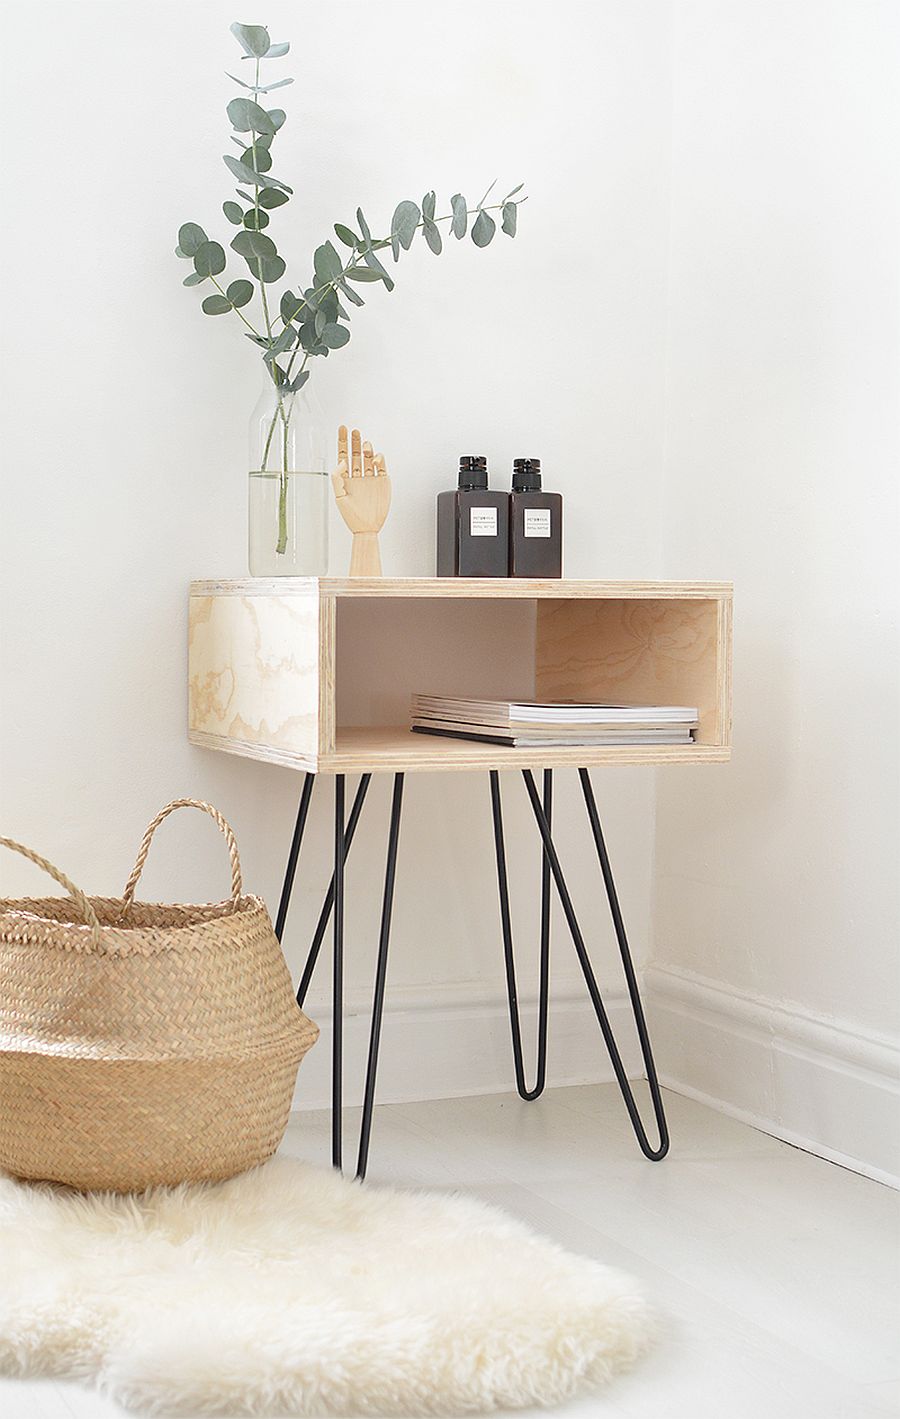 Exquisite mid-century side table and nightstand